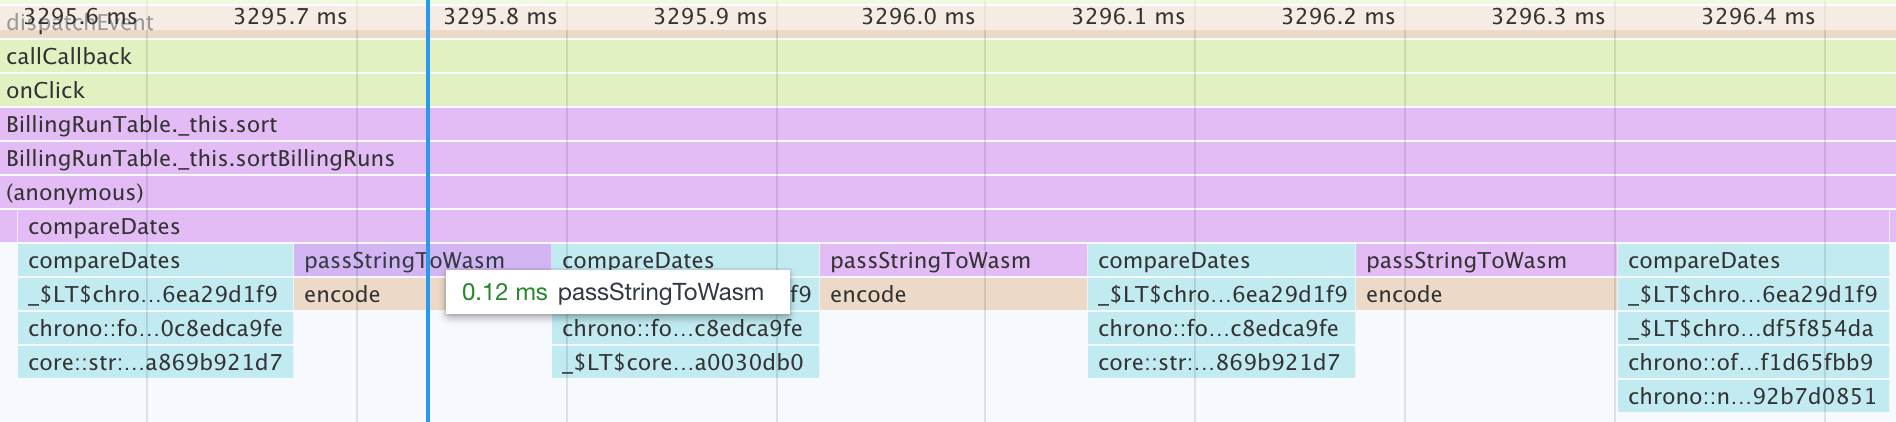 Image showing cost of passStringToWasm - 50% of compareDates cost